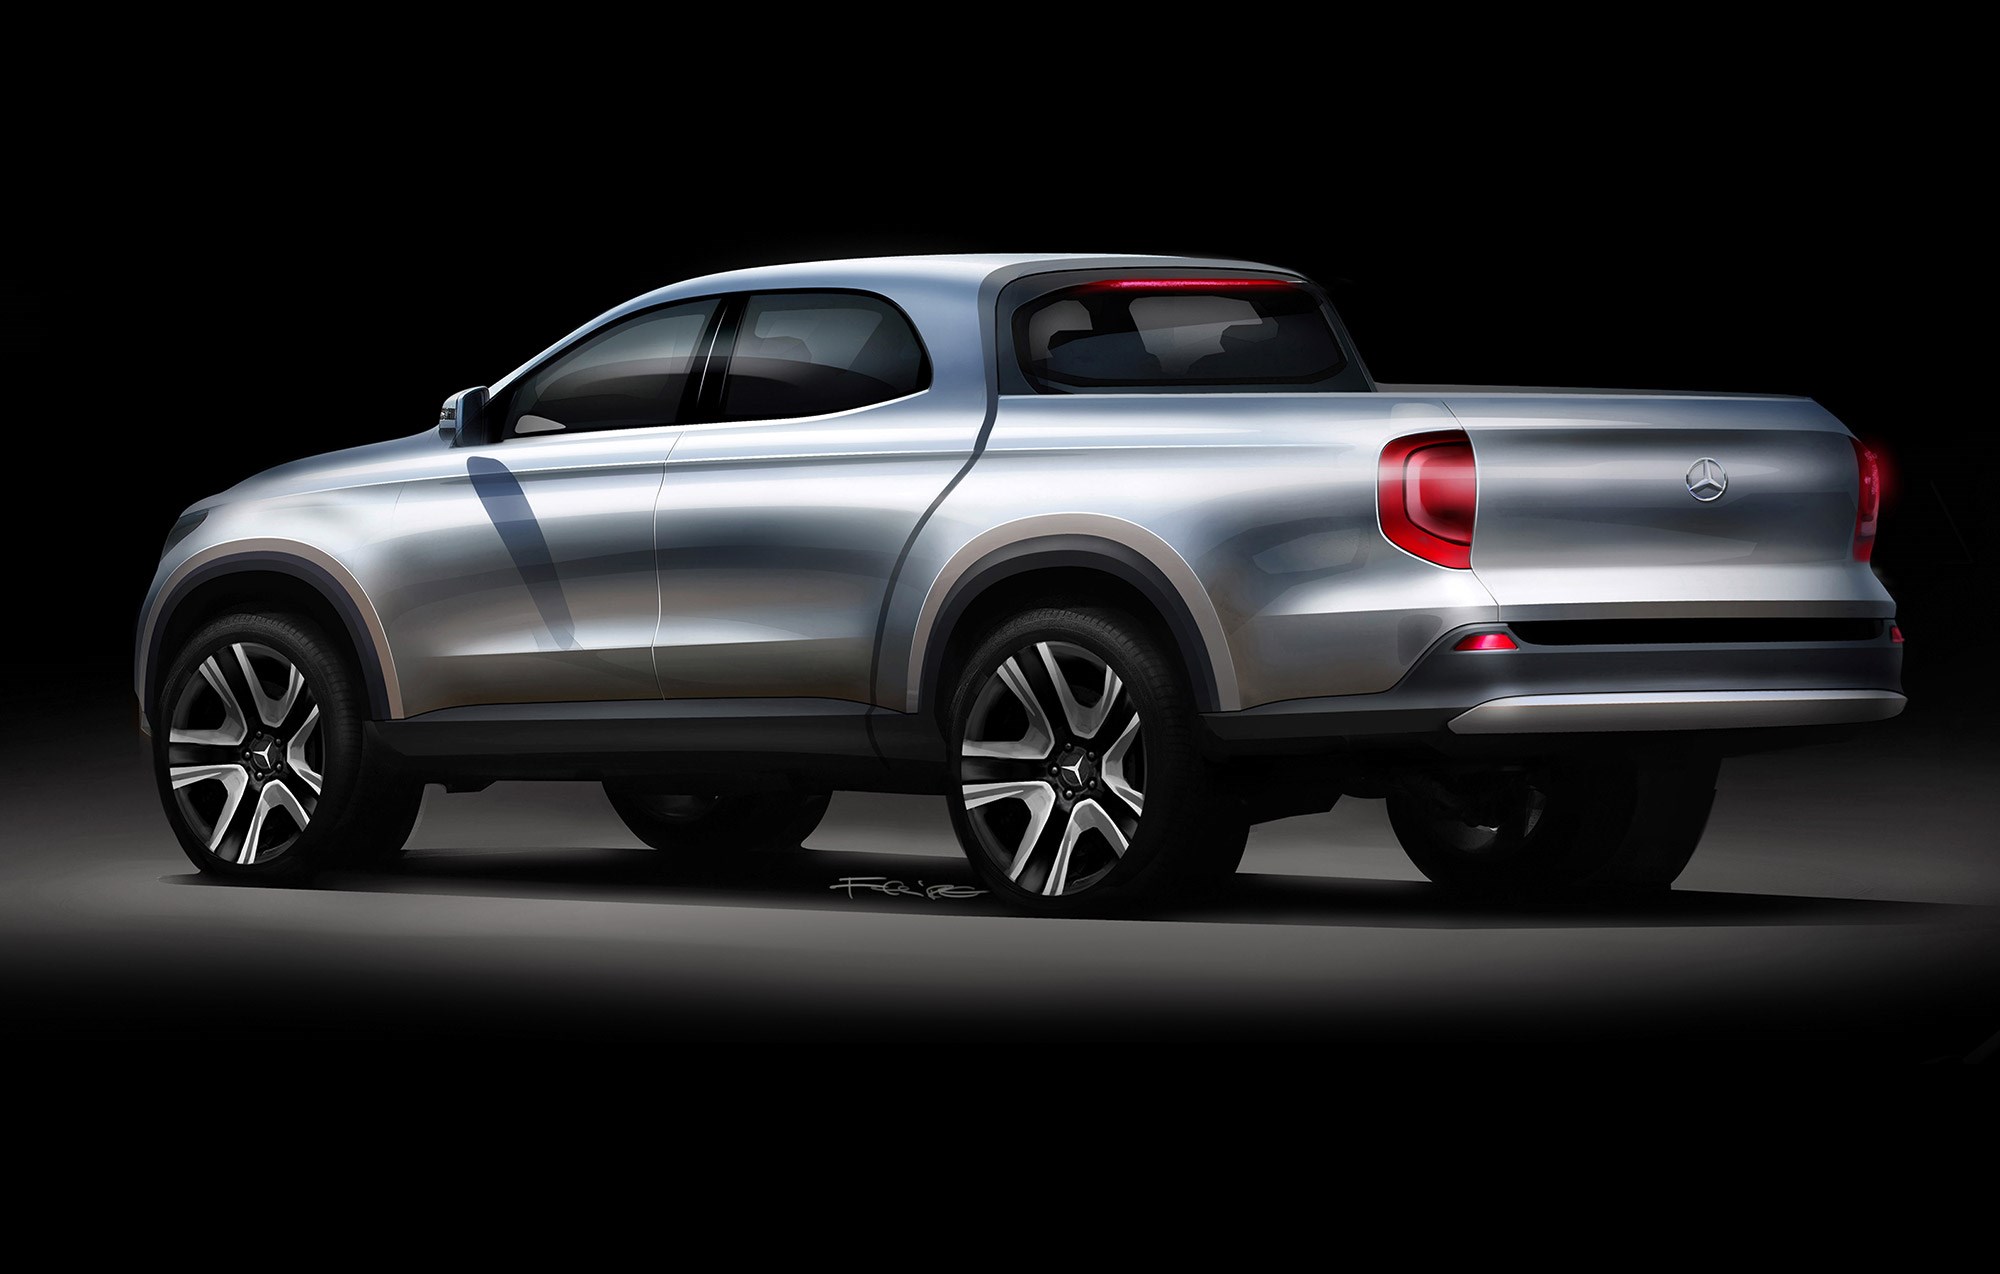 Mercedes GLT: Merc chief on his new pick-up truck developed with